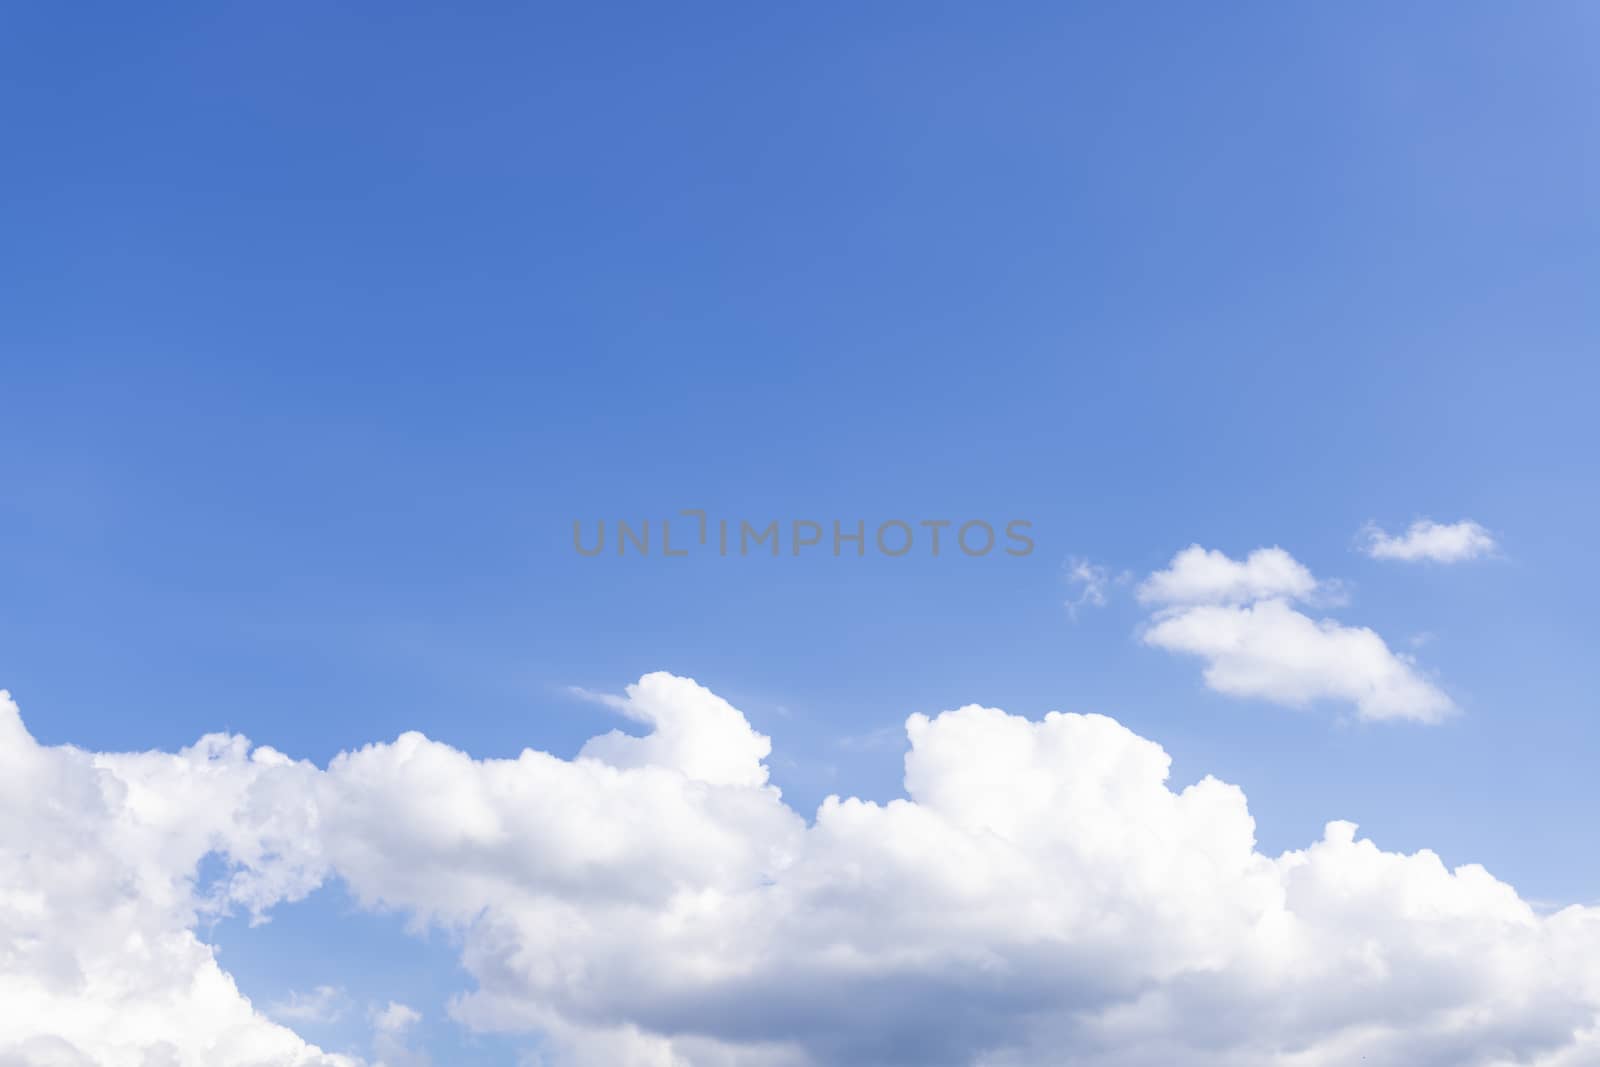 While Clouds over Blue Sky Background by viscorp